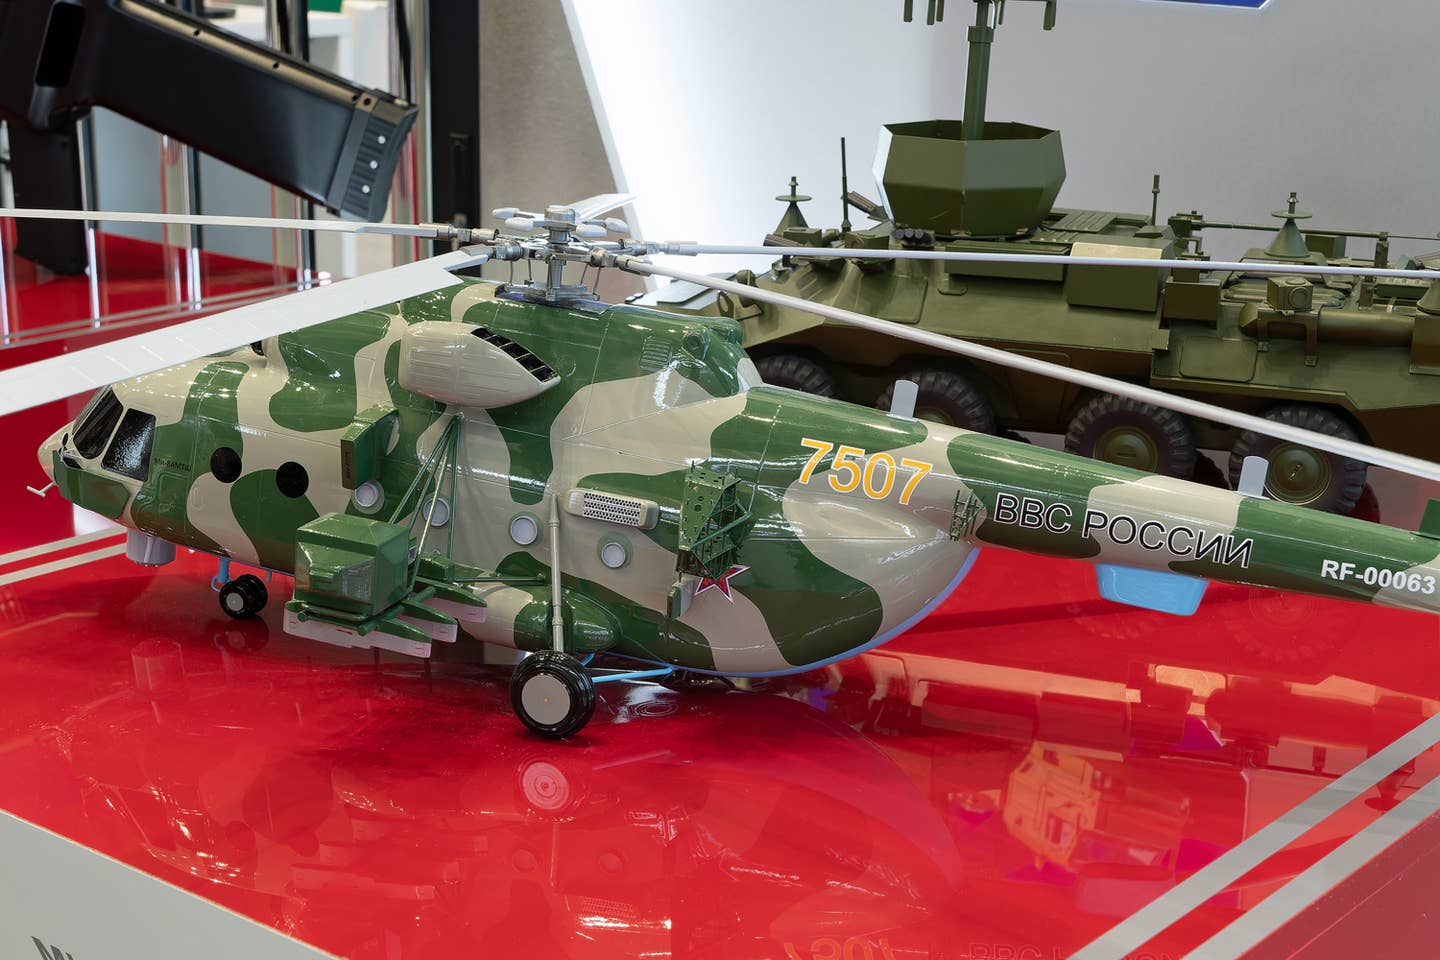 Another view of the Bosfor-2 EW helicopter model. It’s not known whether the large number 7507 has any significance. <em>Piotr Butowski</em>